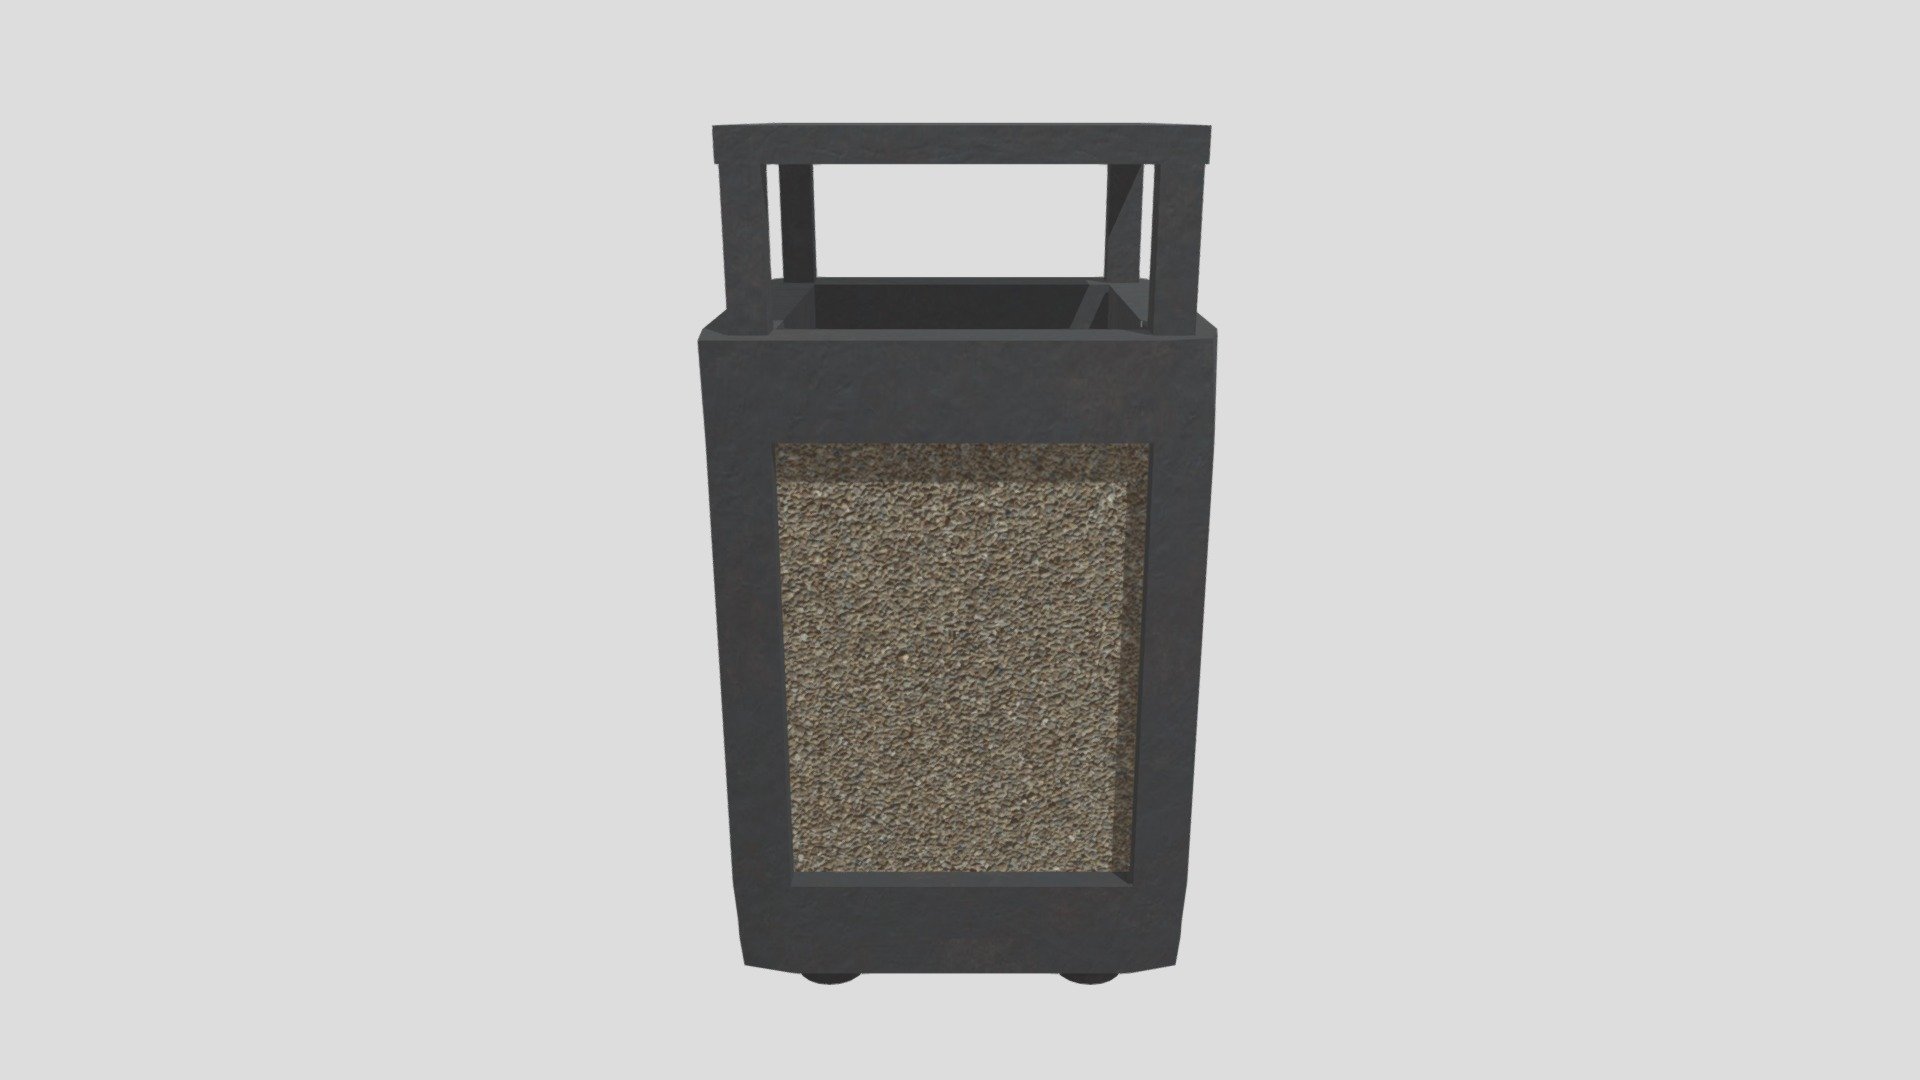 A street trash can with texture - Trash can 2 - 3D model by Lexxington (@LEXI13223) 3d model